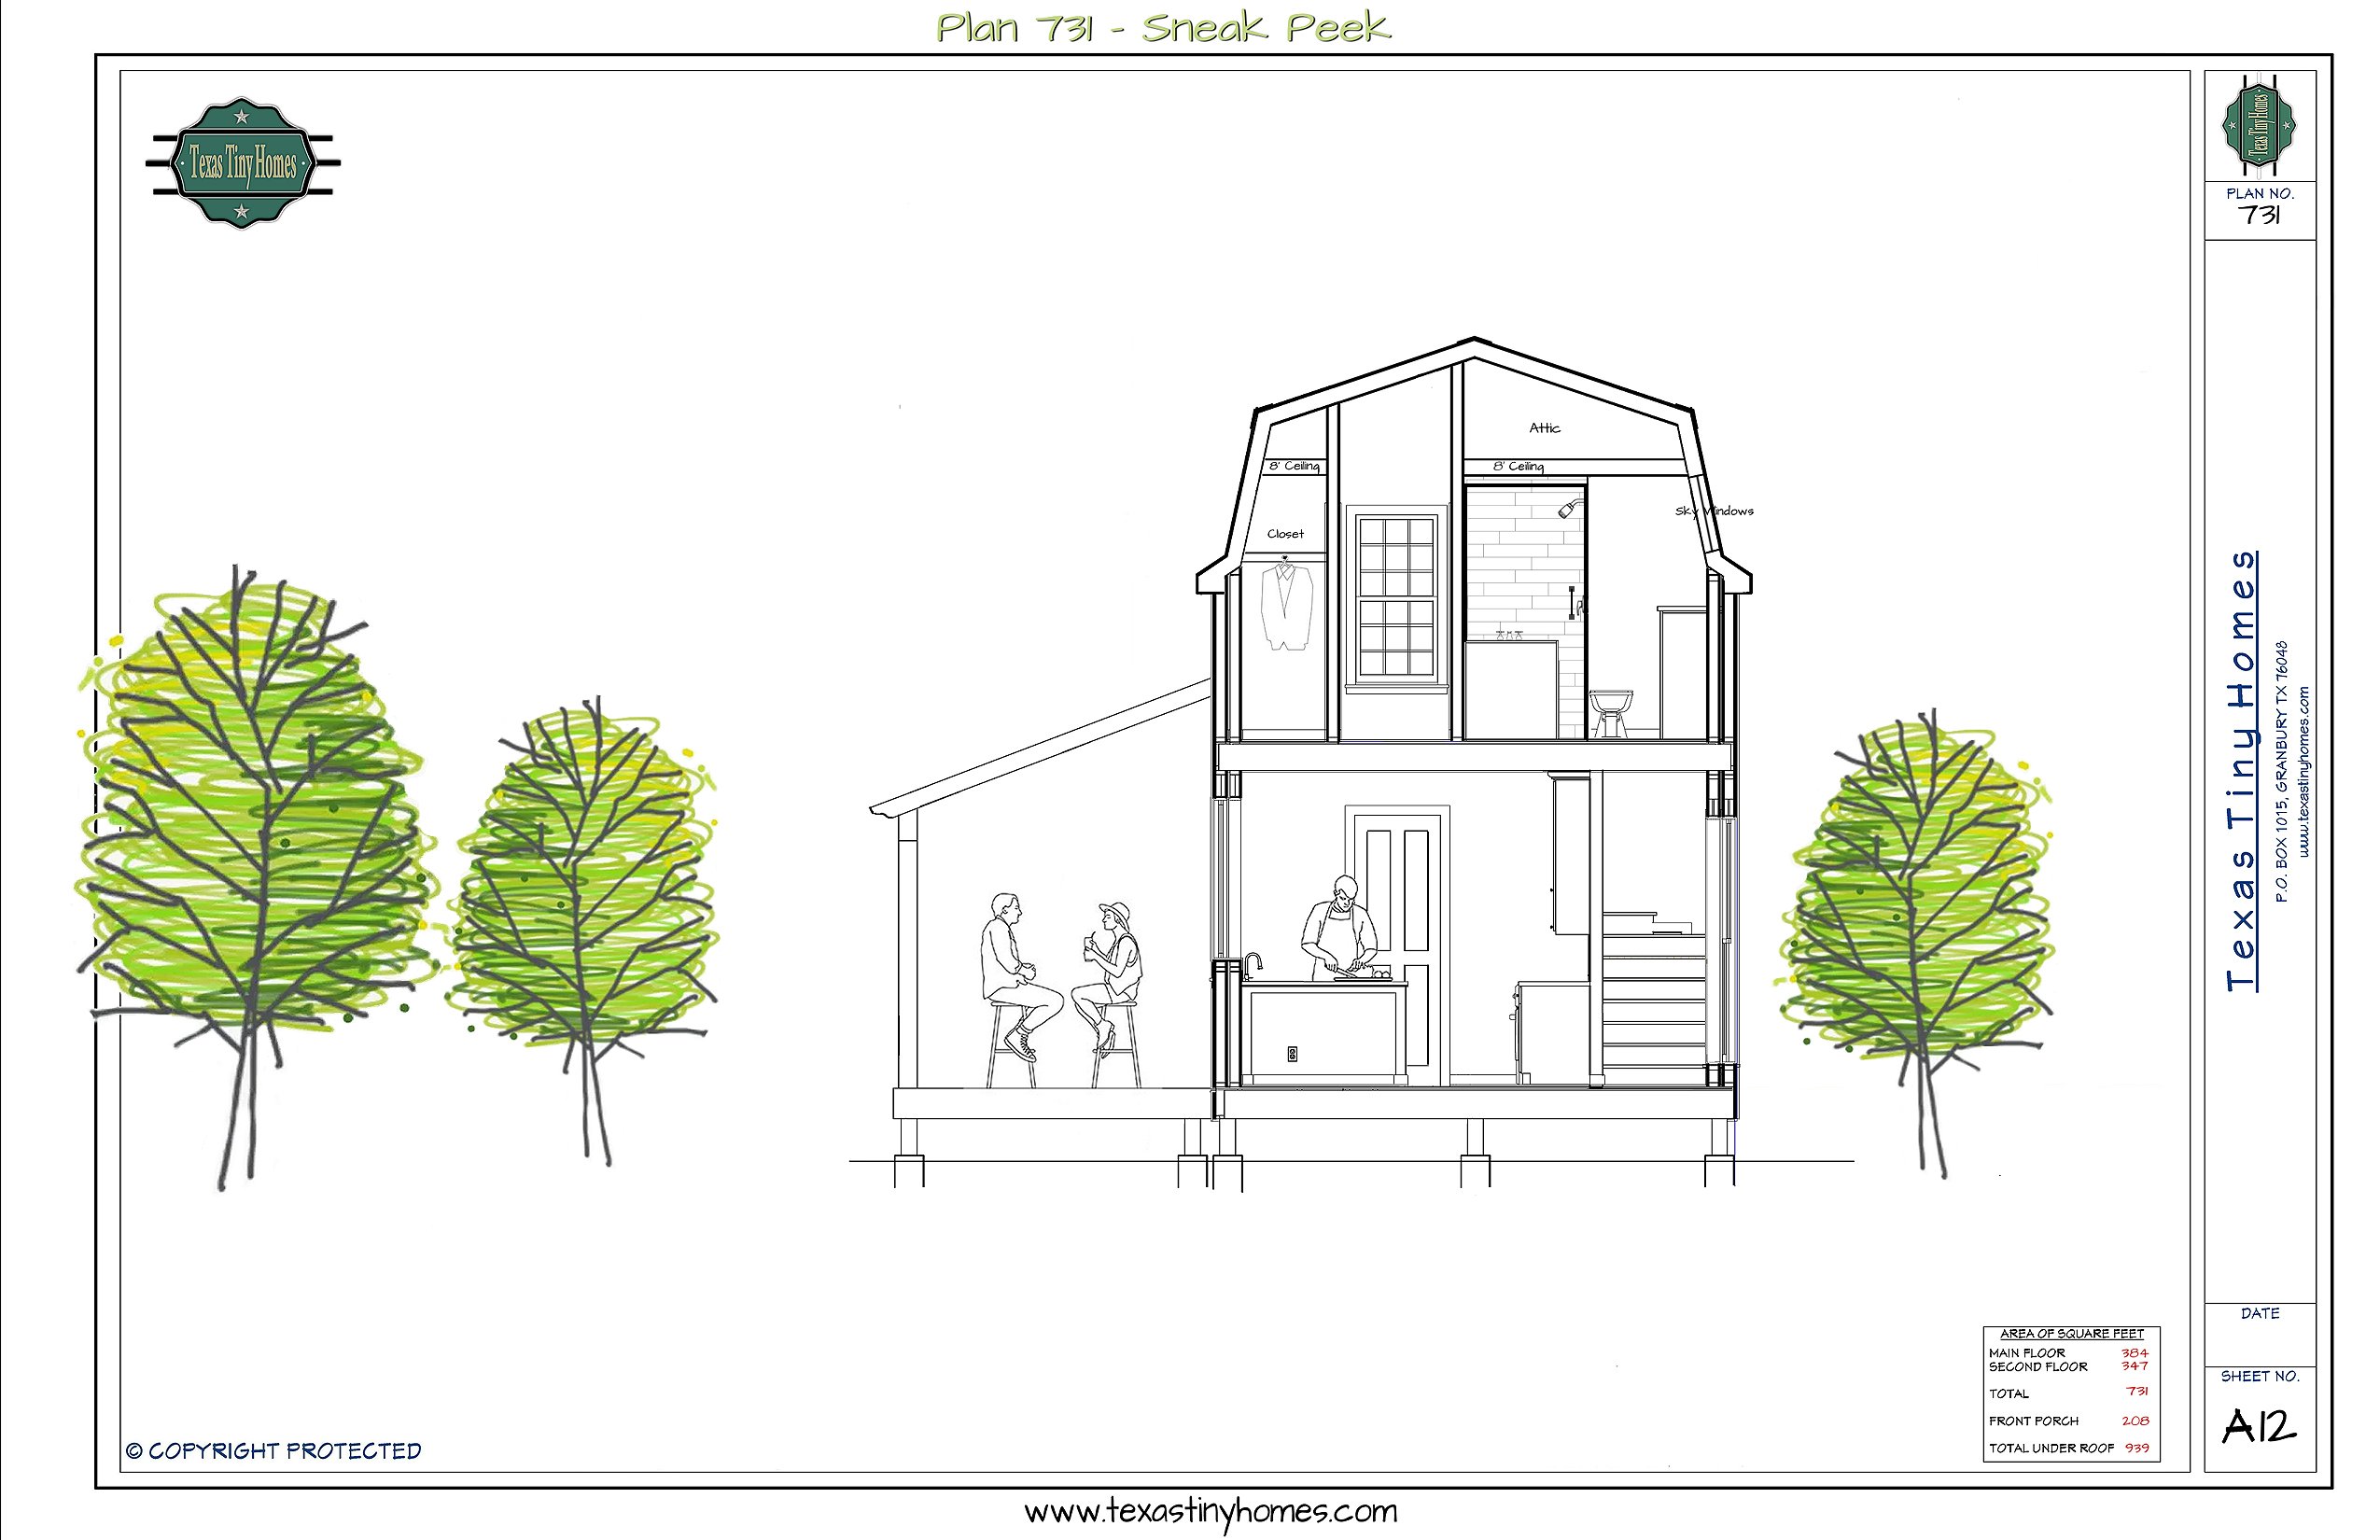 Tiny Houses, Tiny Homes, Tiny House Plans, Small House Plans, Micro Home Plans, Micro House Plans, Tiny Home Plans, Tiny House Builder, Tiny Houses Dallas, Tiny Houses Austin, Tiny Homes Builder, Small houses, Small Homes Builder, Small Luxury Homes, Little House Plans, Little Homes 